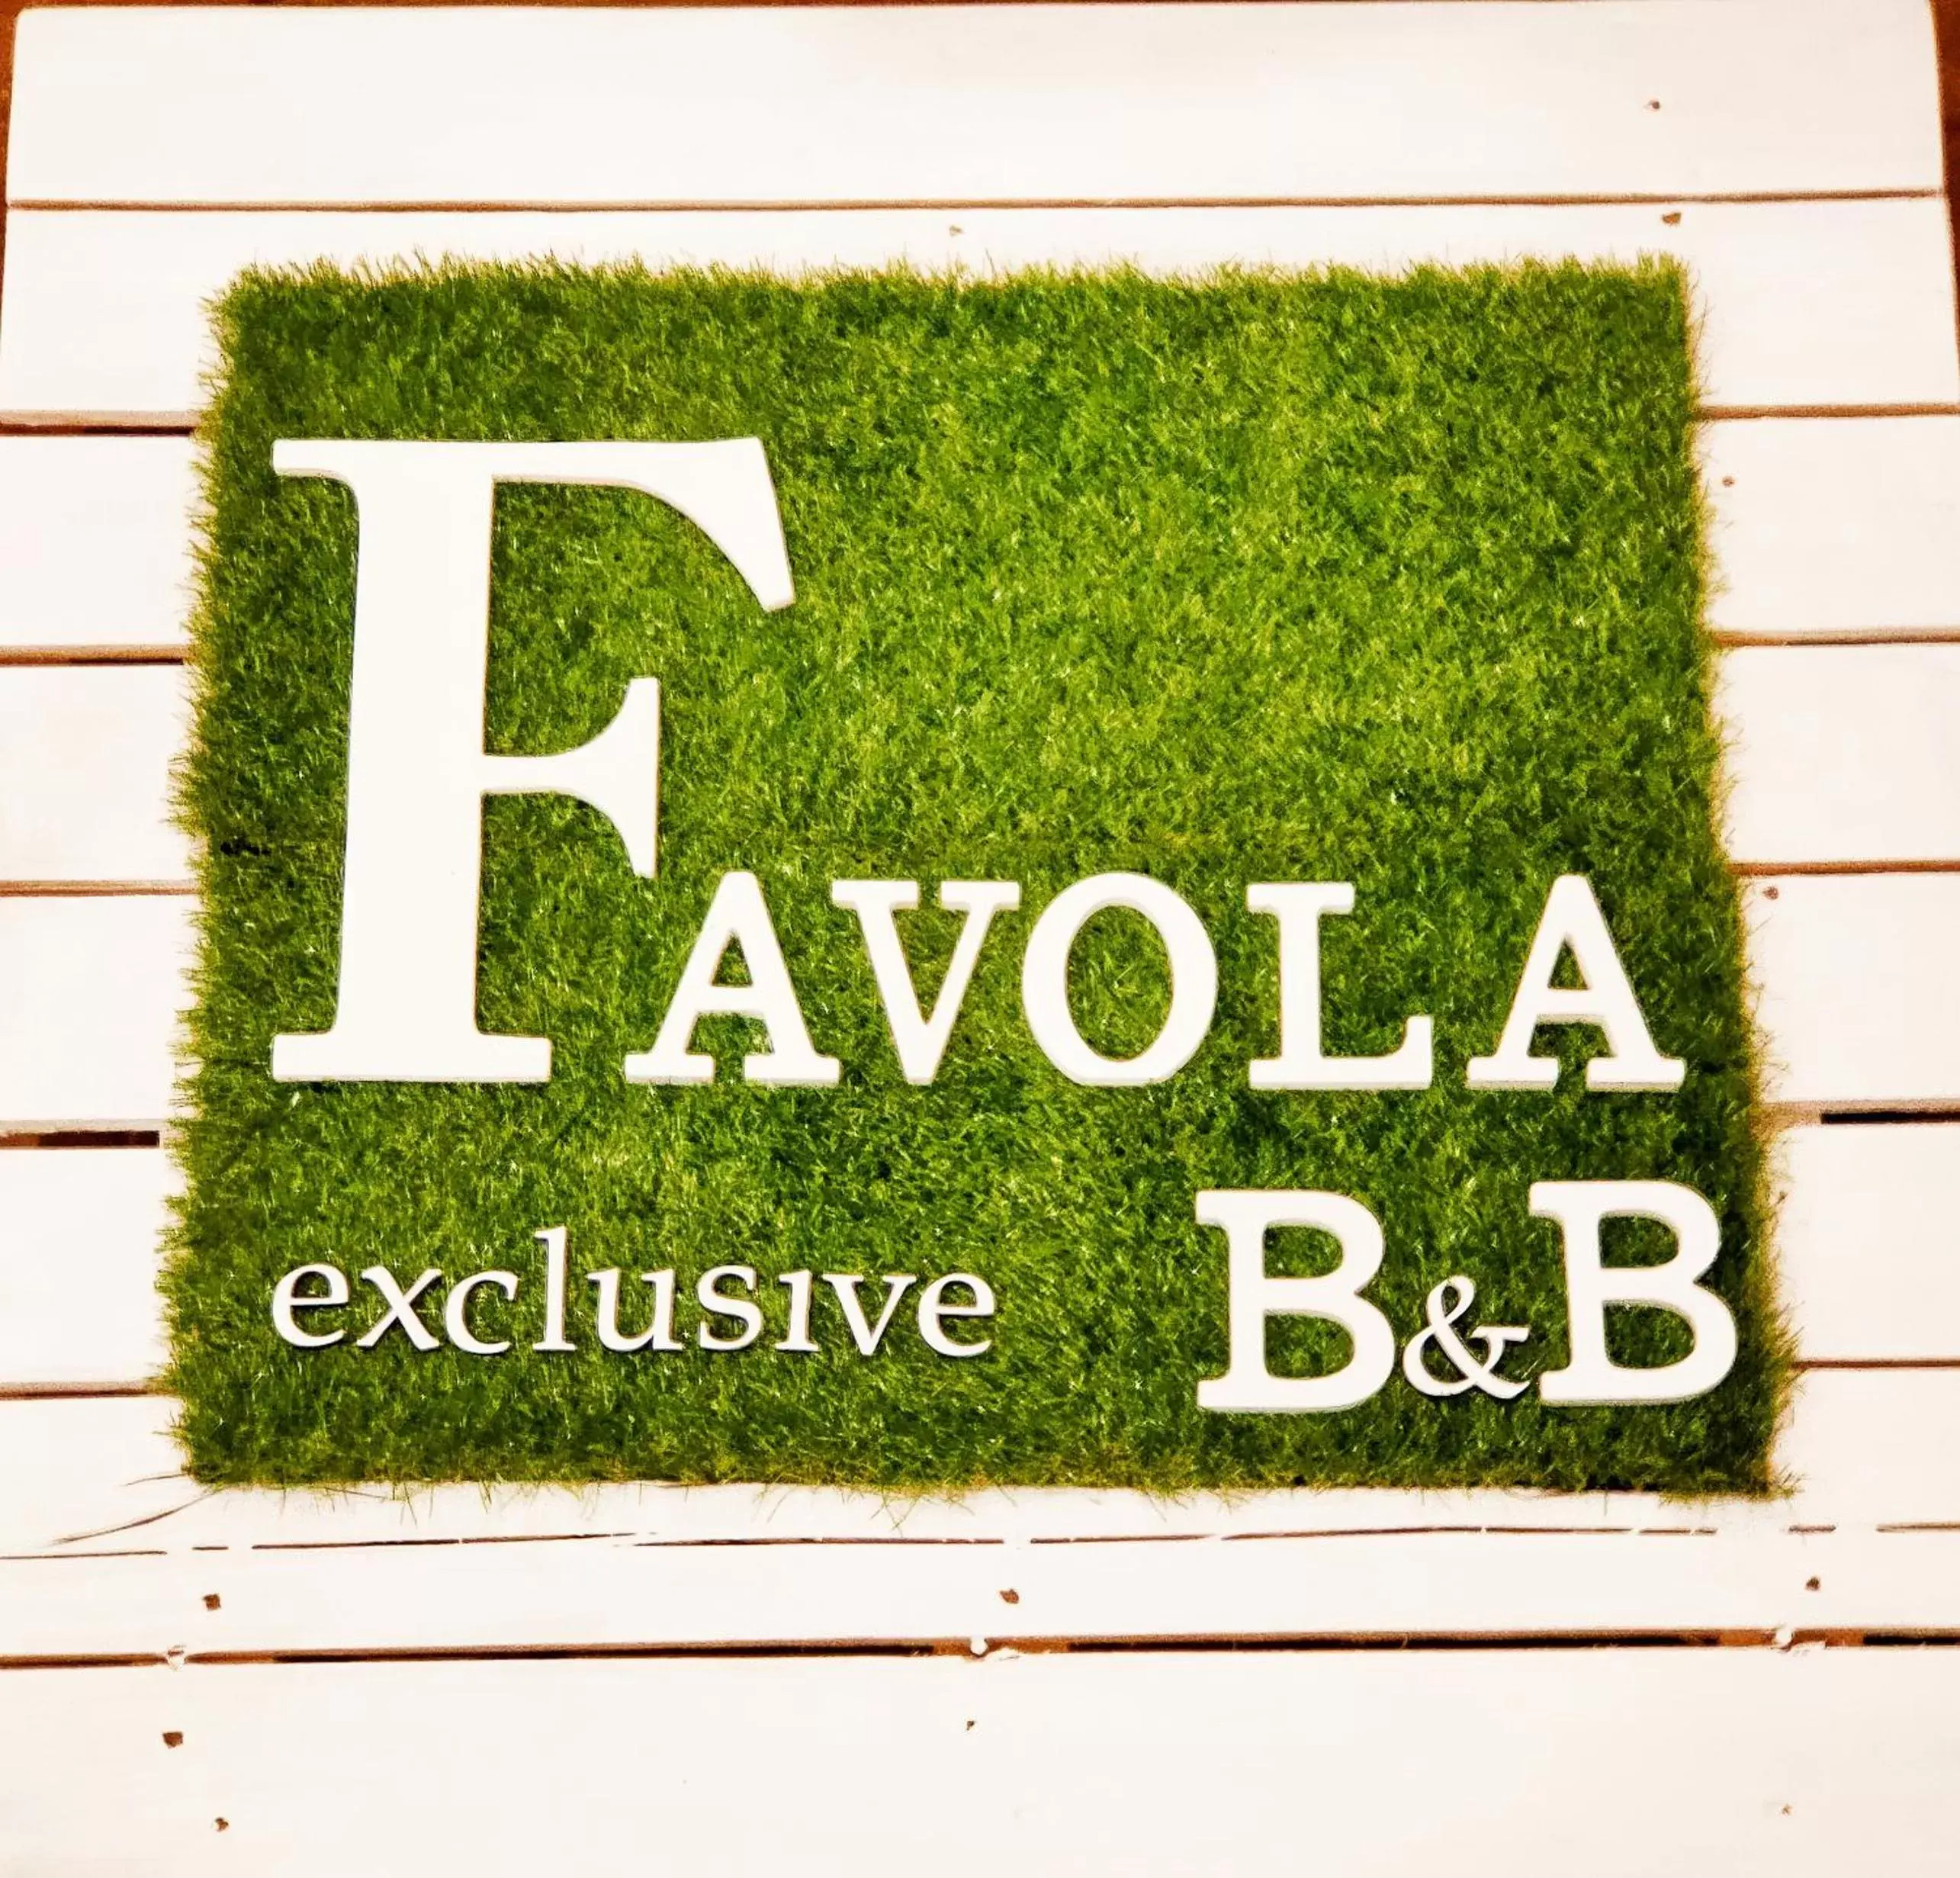 Property logo or sign in Favola Exclusive b&b